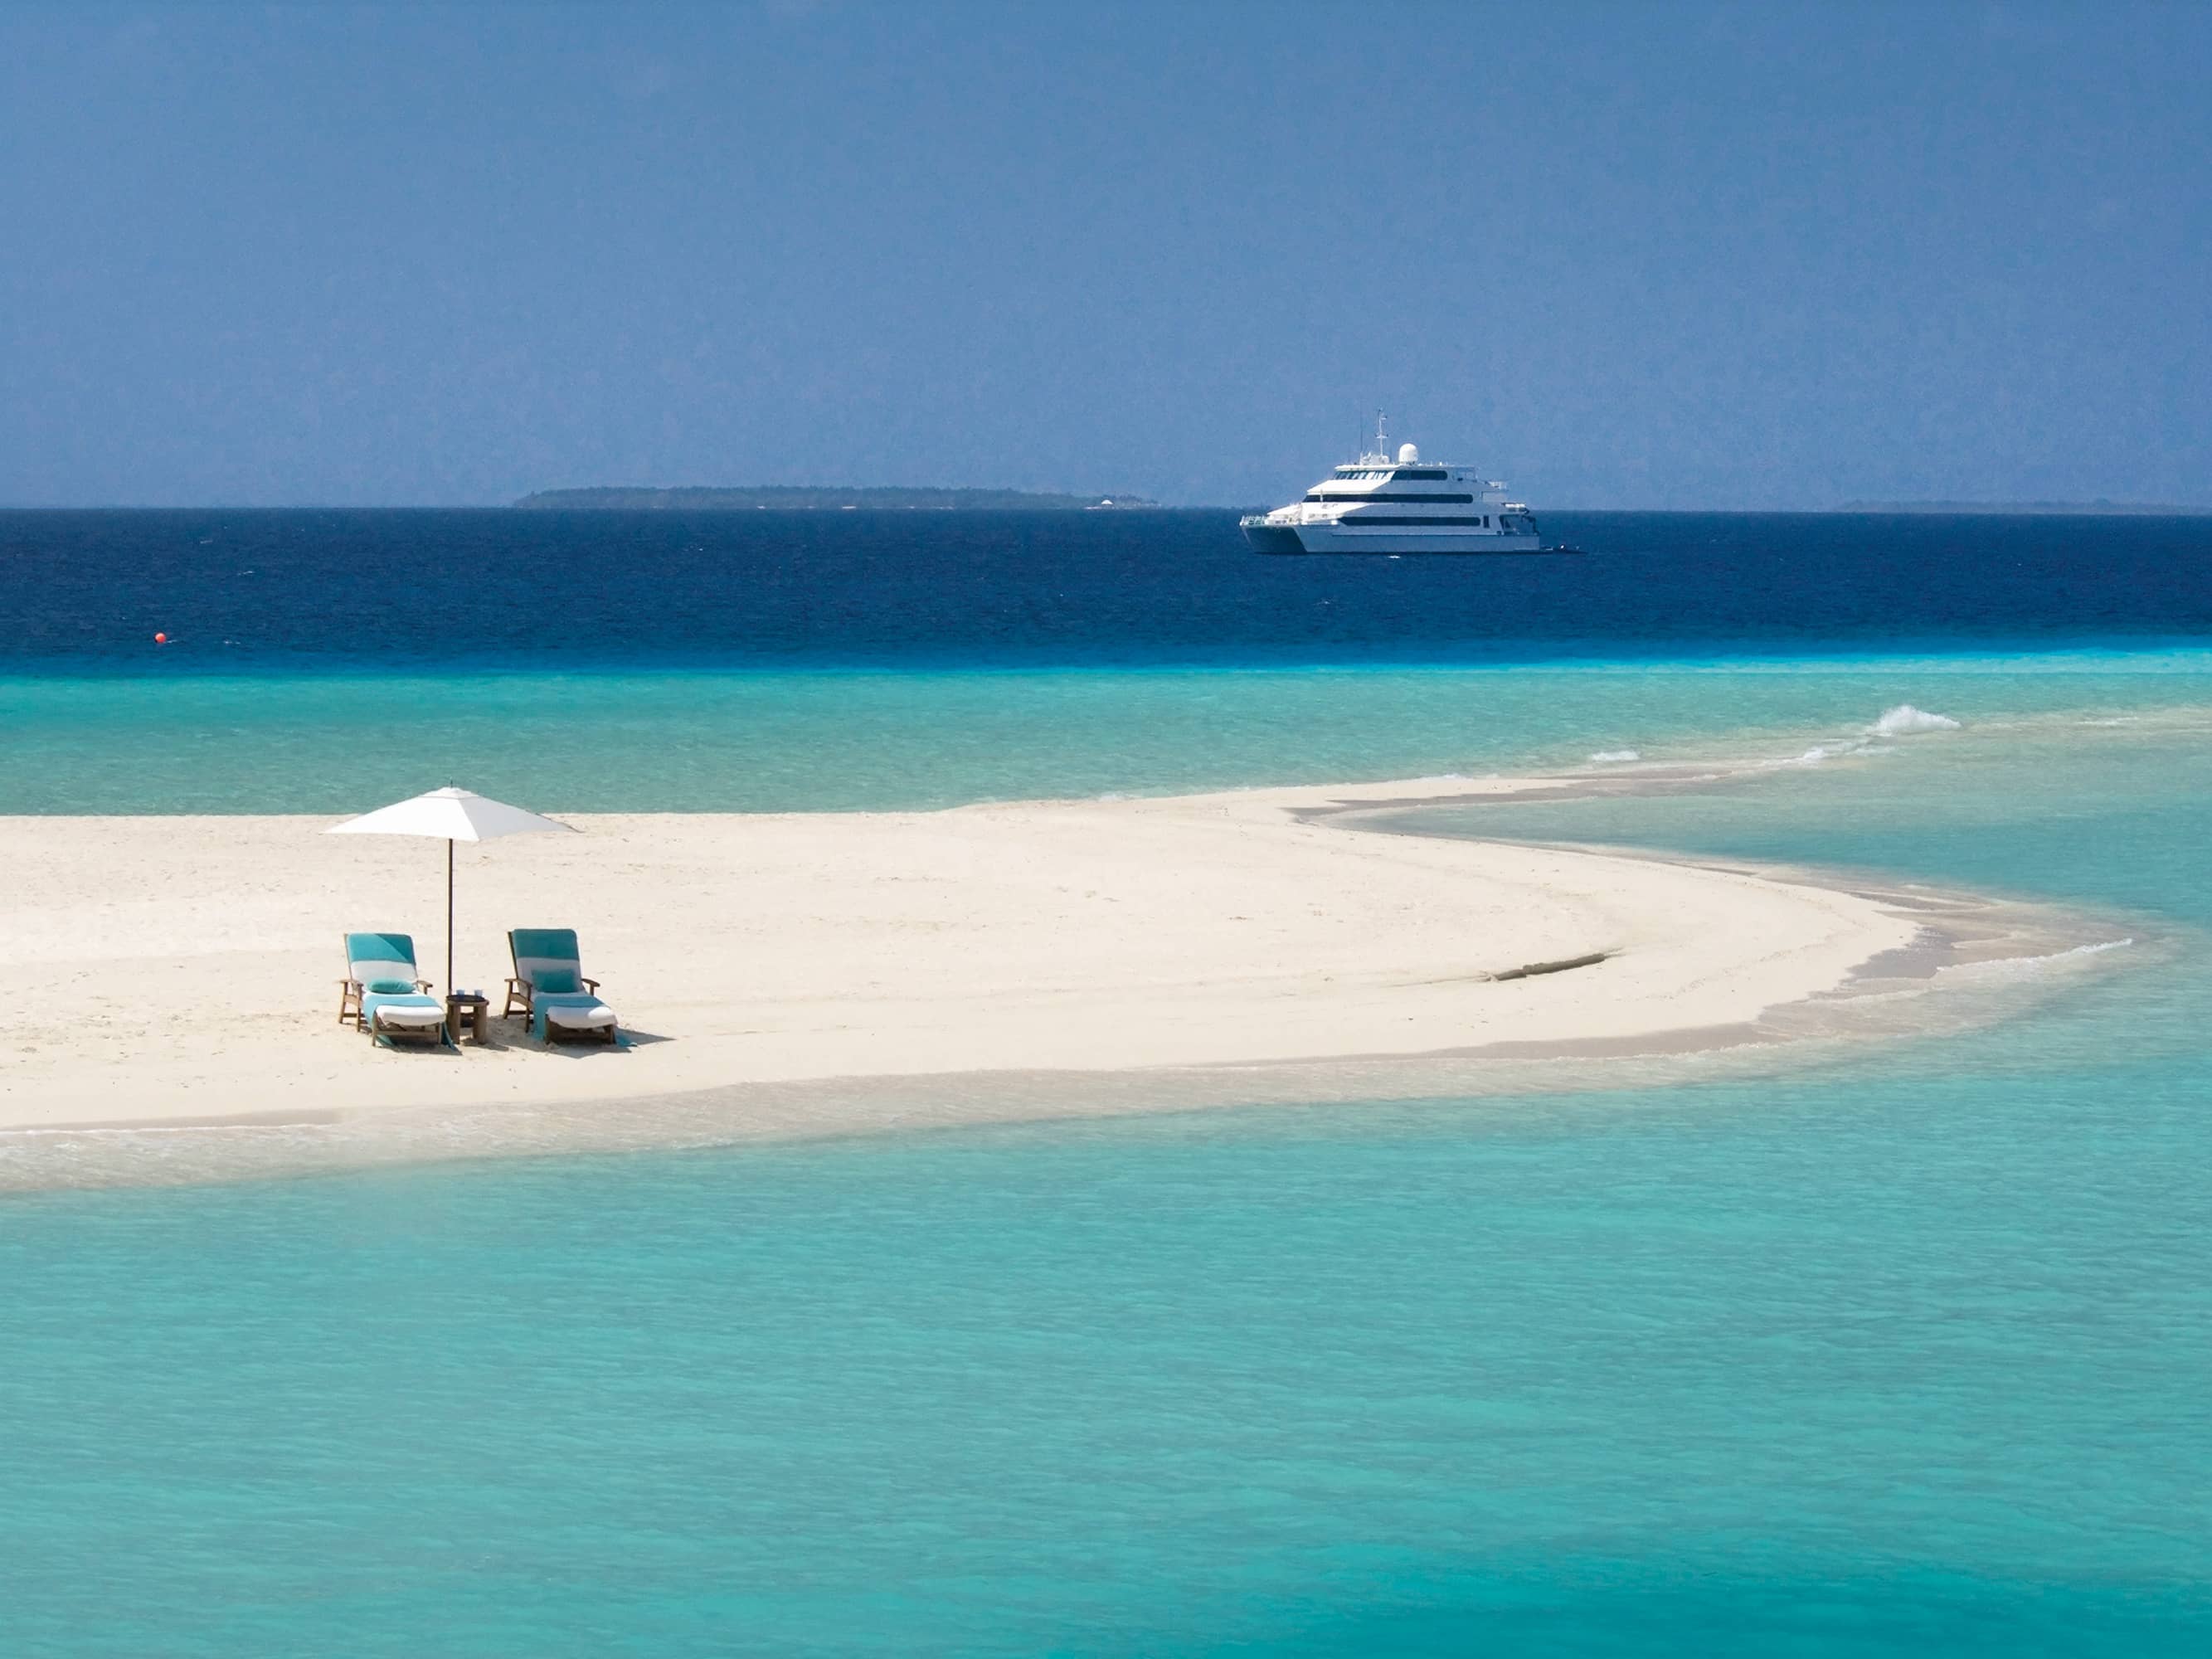  Relax on a private coral island in the Maldives  